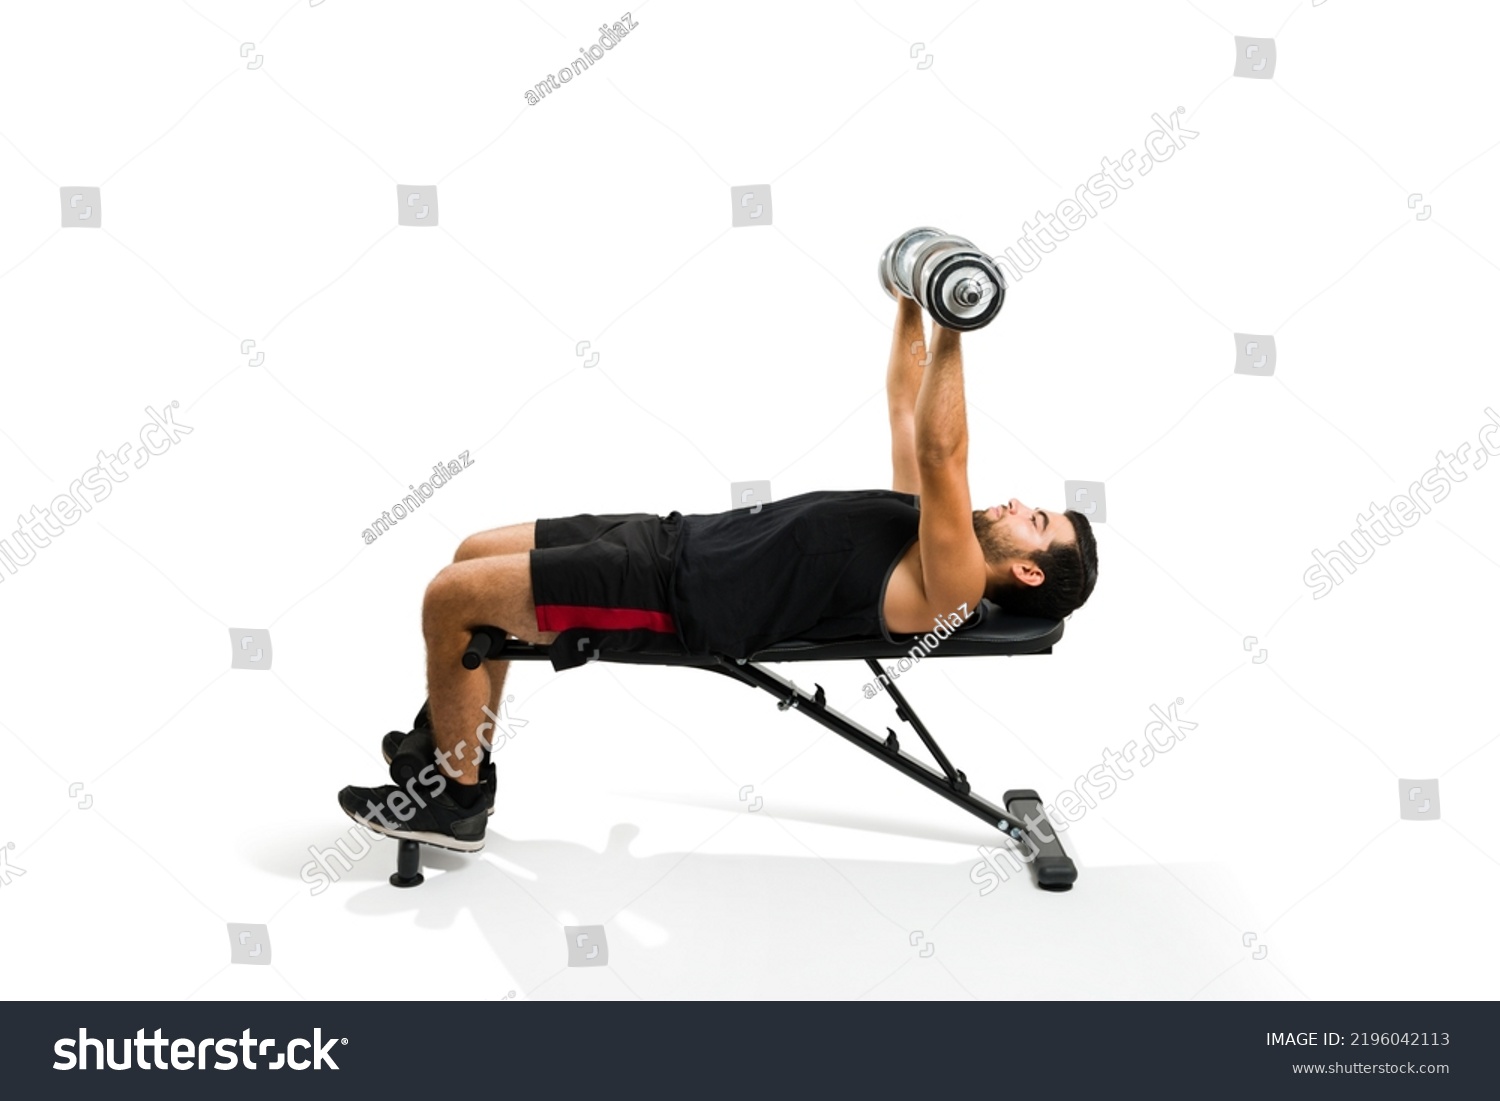 Fitness hispanic man lifting dumbbell weights and exercising doing a bench press isolated on a white background #2196042113